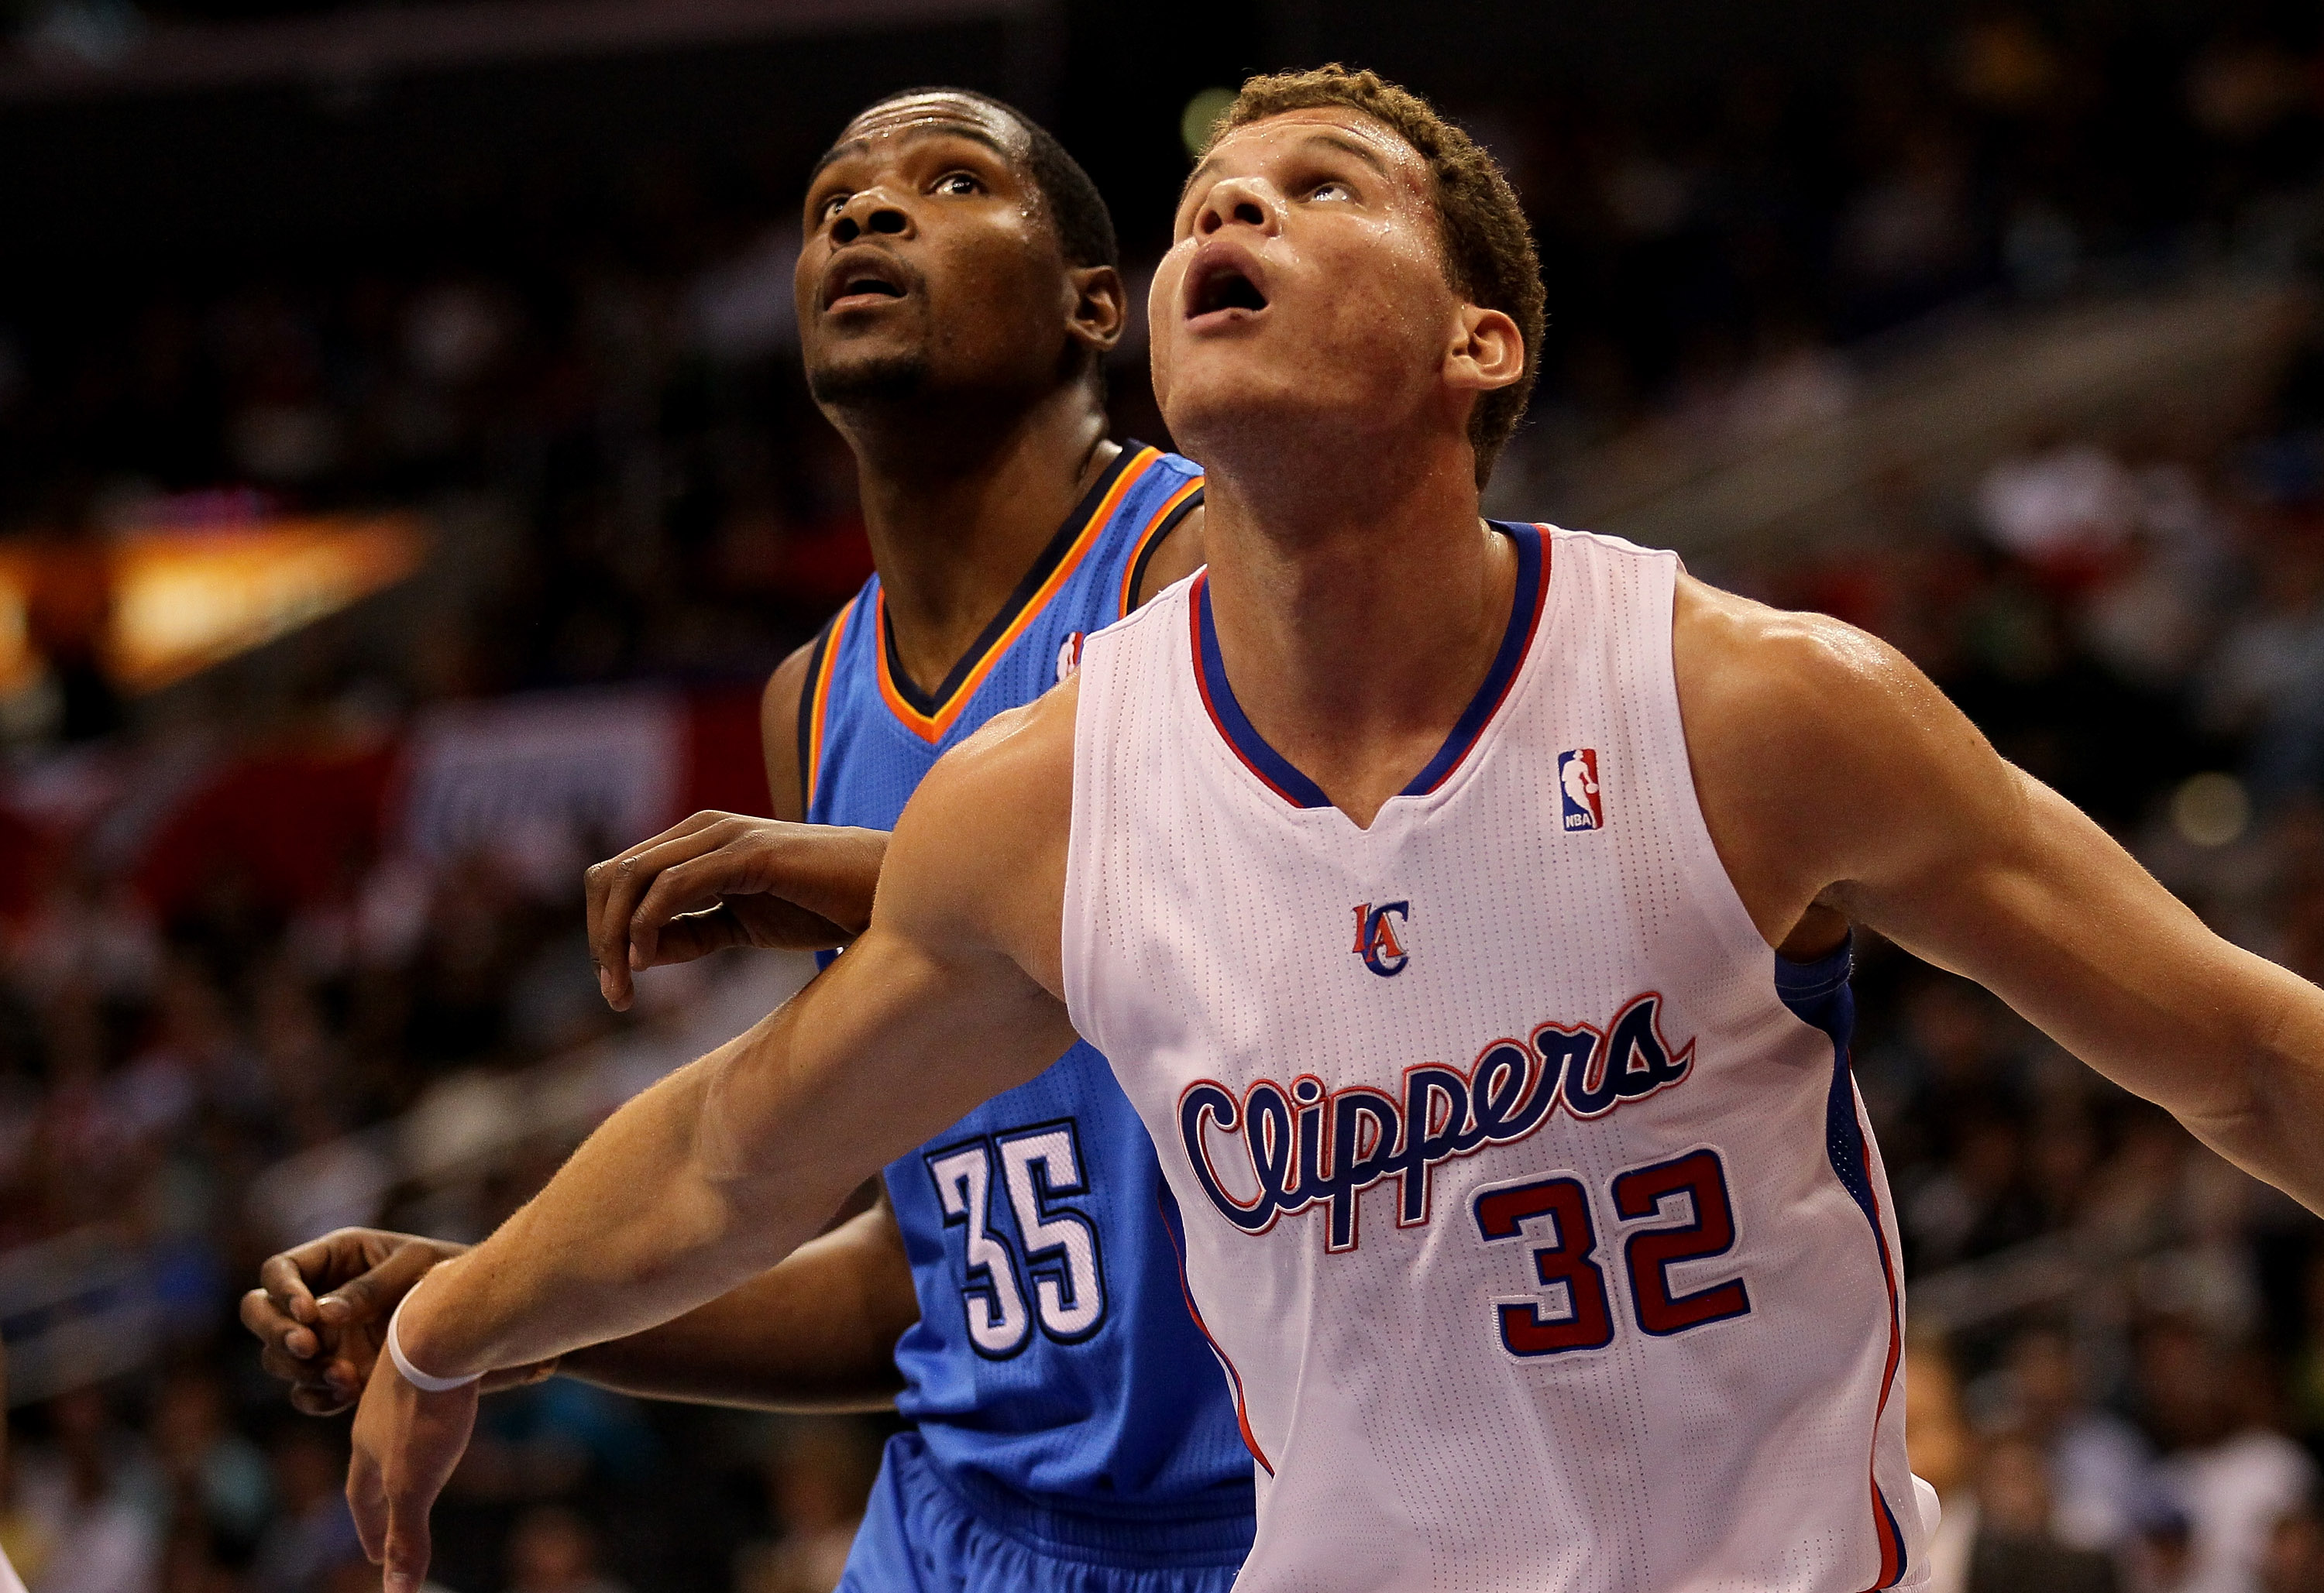 LOS ANGELES - NOVEMBER 3:  Blake Griffin #32 of the Los Angeles Clippers and Kevin Durant #35 of the Oklahoma City Thunder look for a rebound at Staples Center on November 3, 2010 in Los Angeles, California.  NOTE TO USER: User expressly acknowledges and